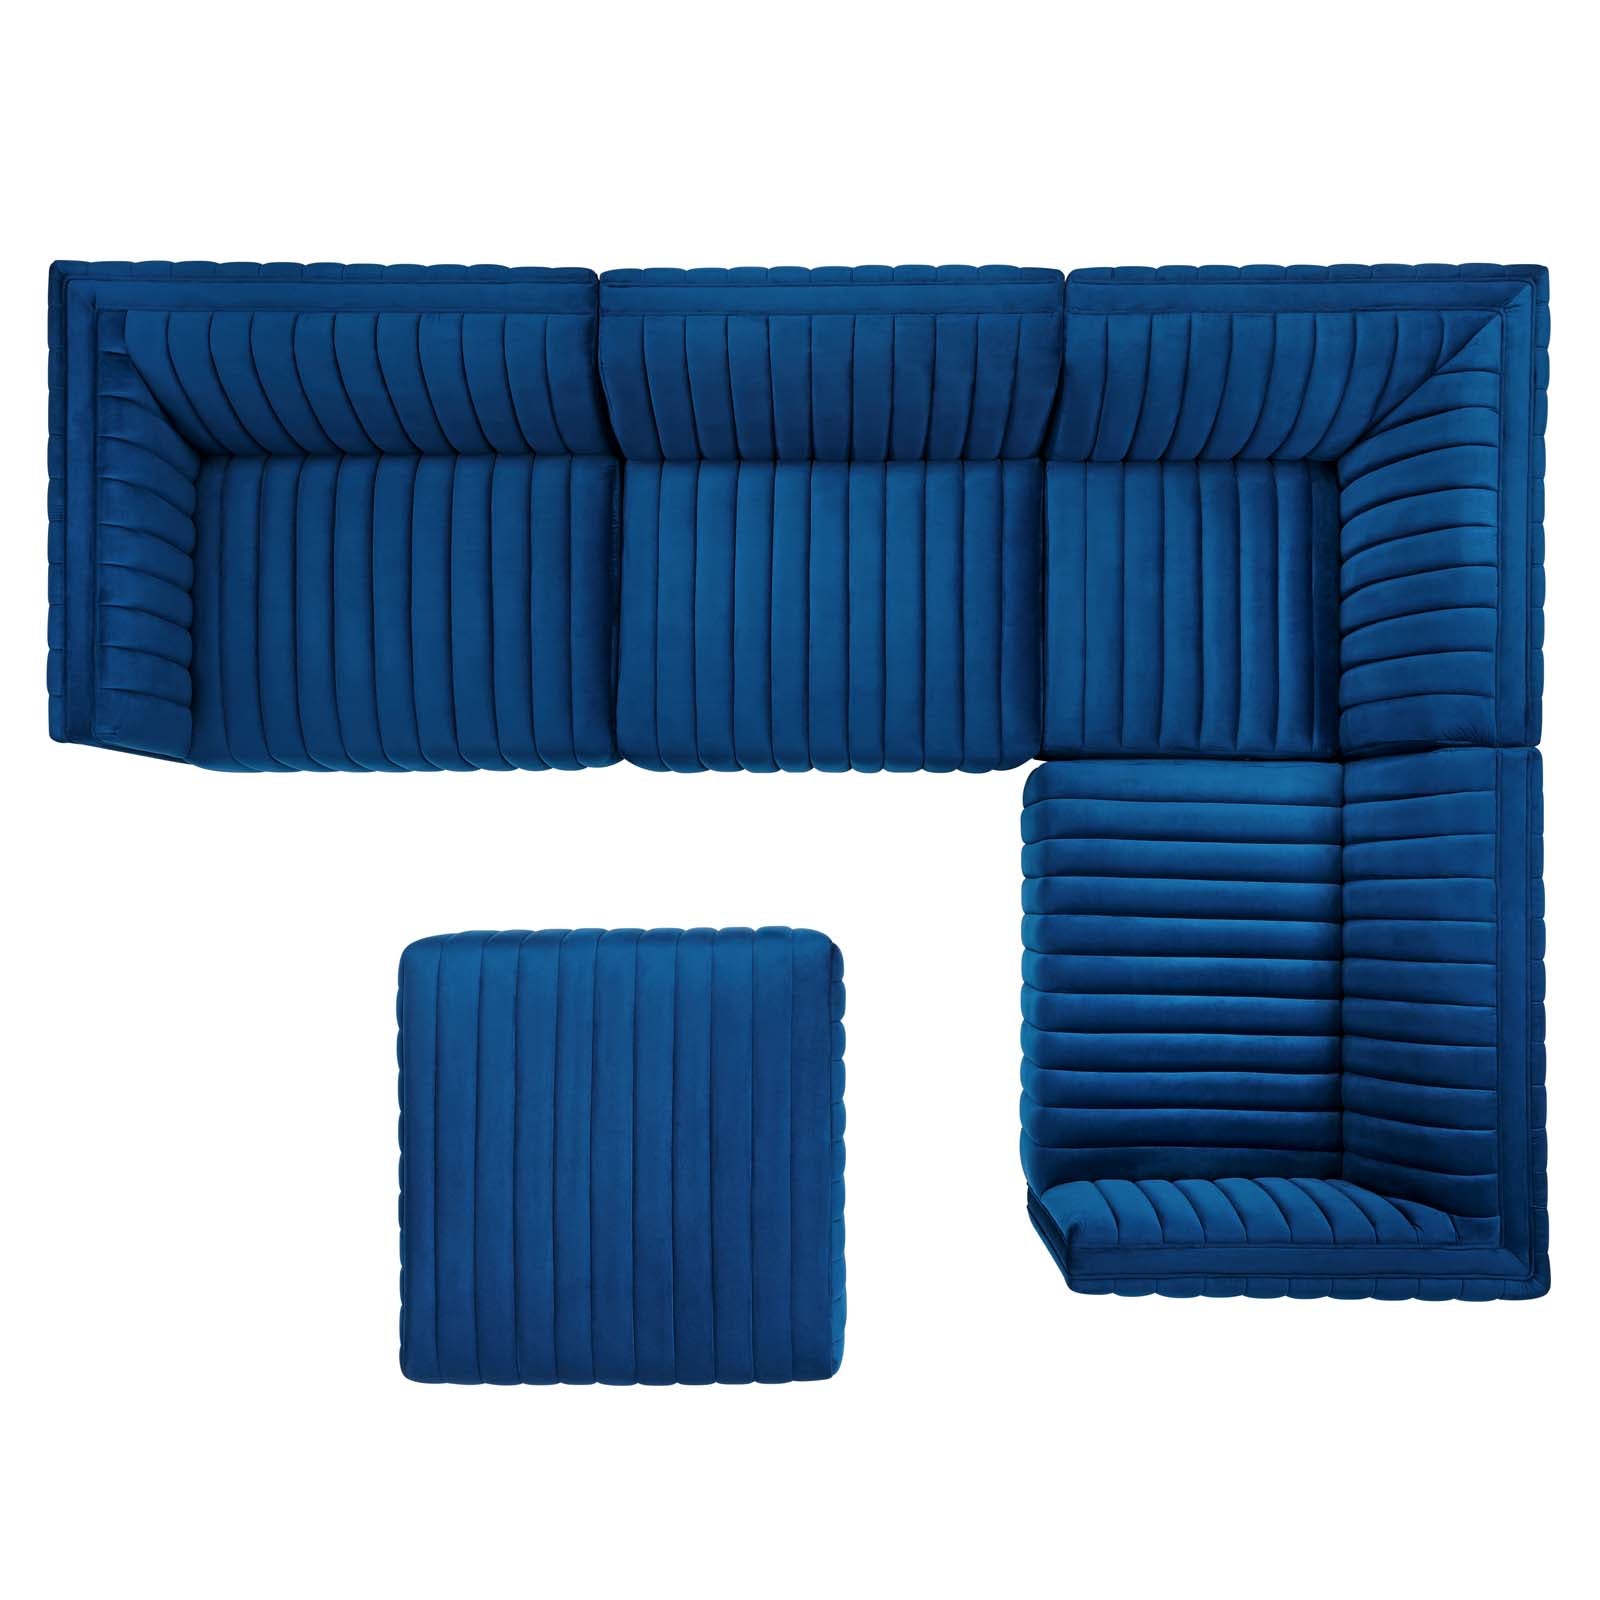 Conjure Channel Tufted Performance Velvet 5-Piece Sectional-Sectional-Modway-Wall2Wall Furnishings